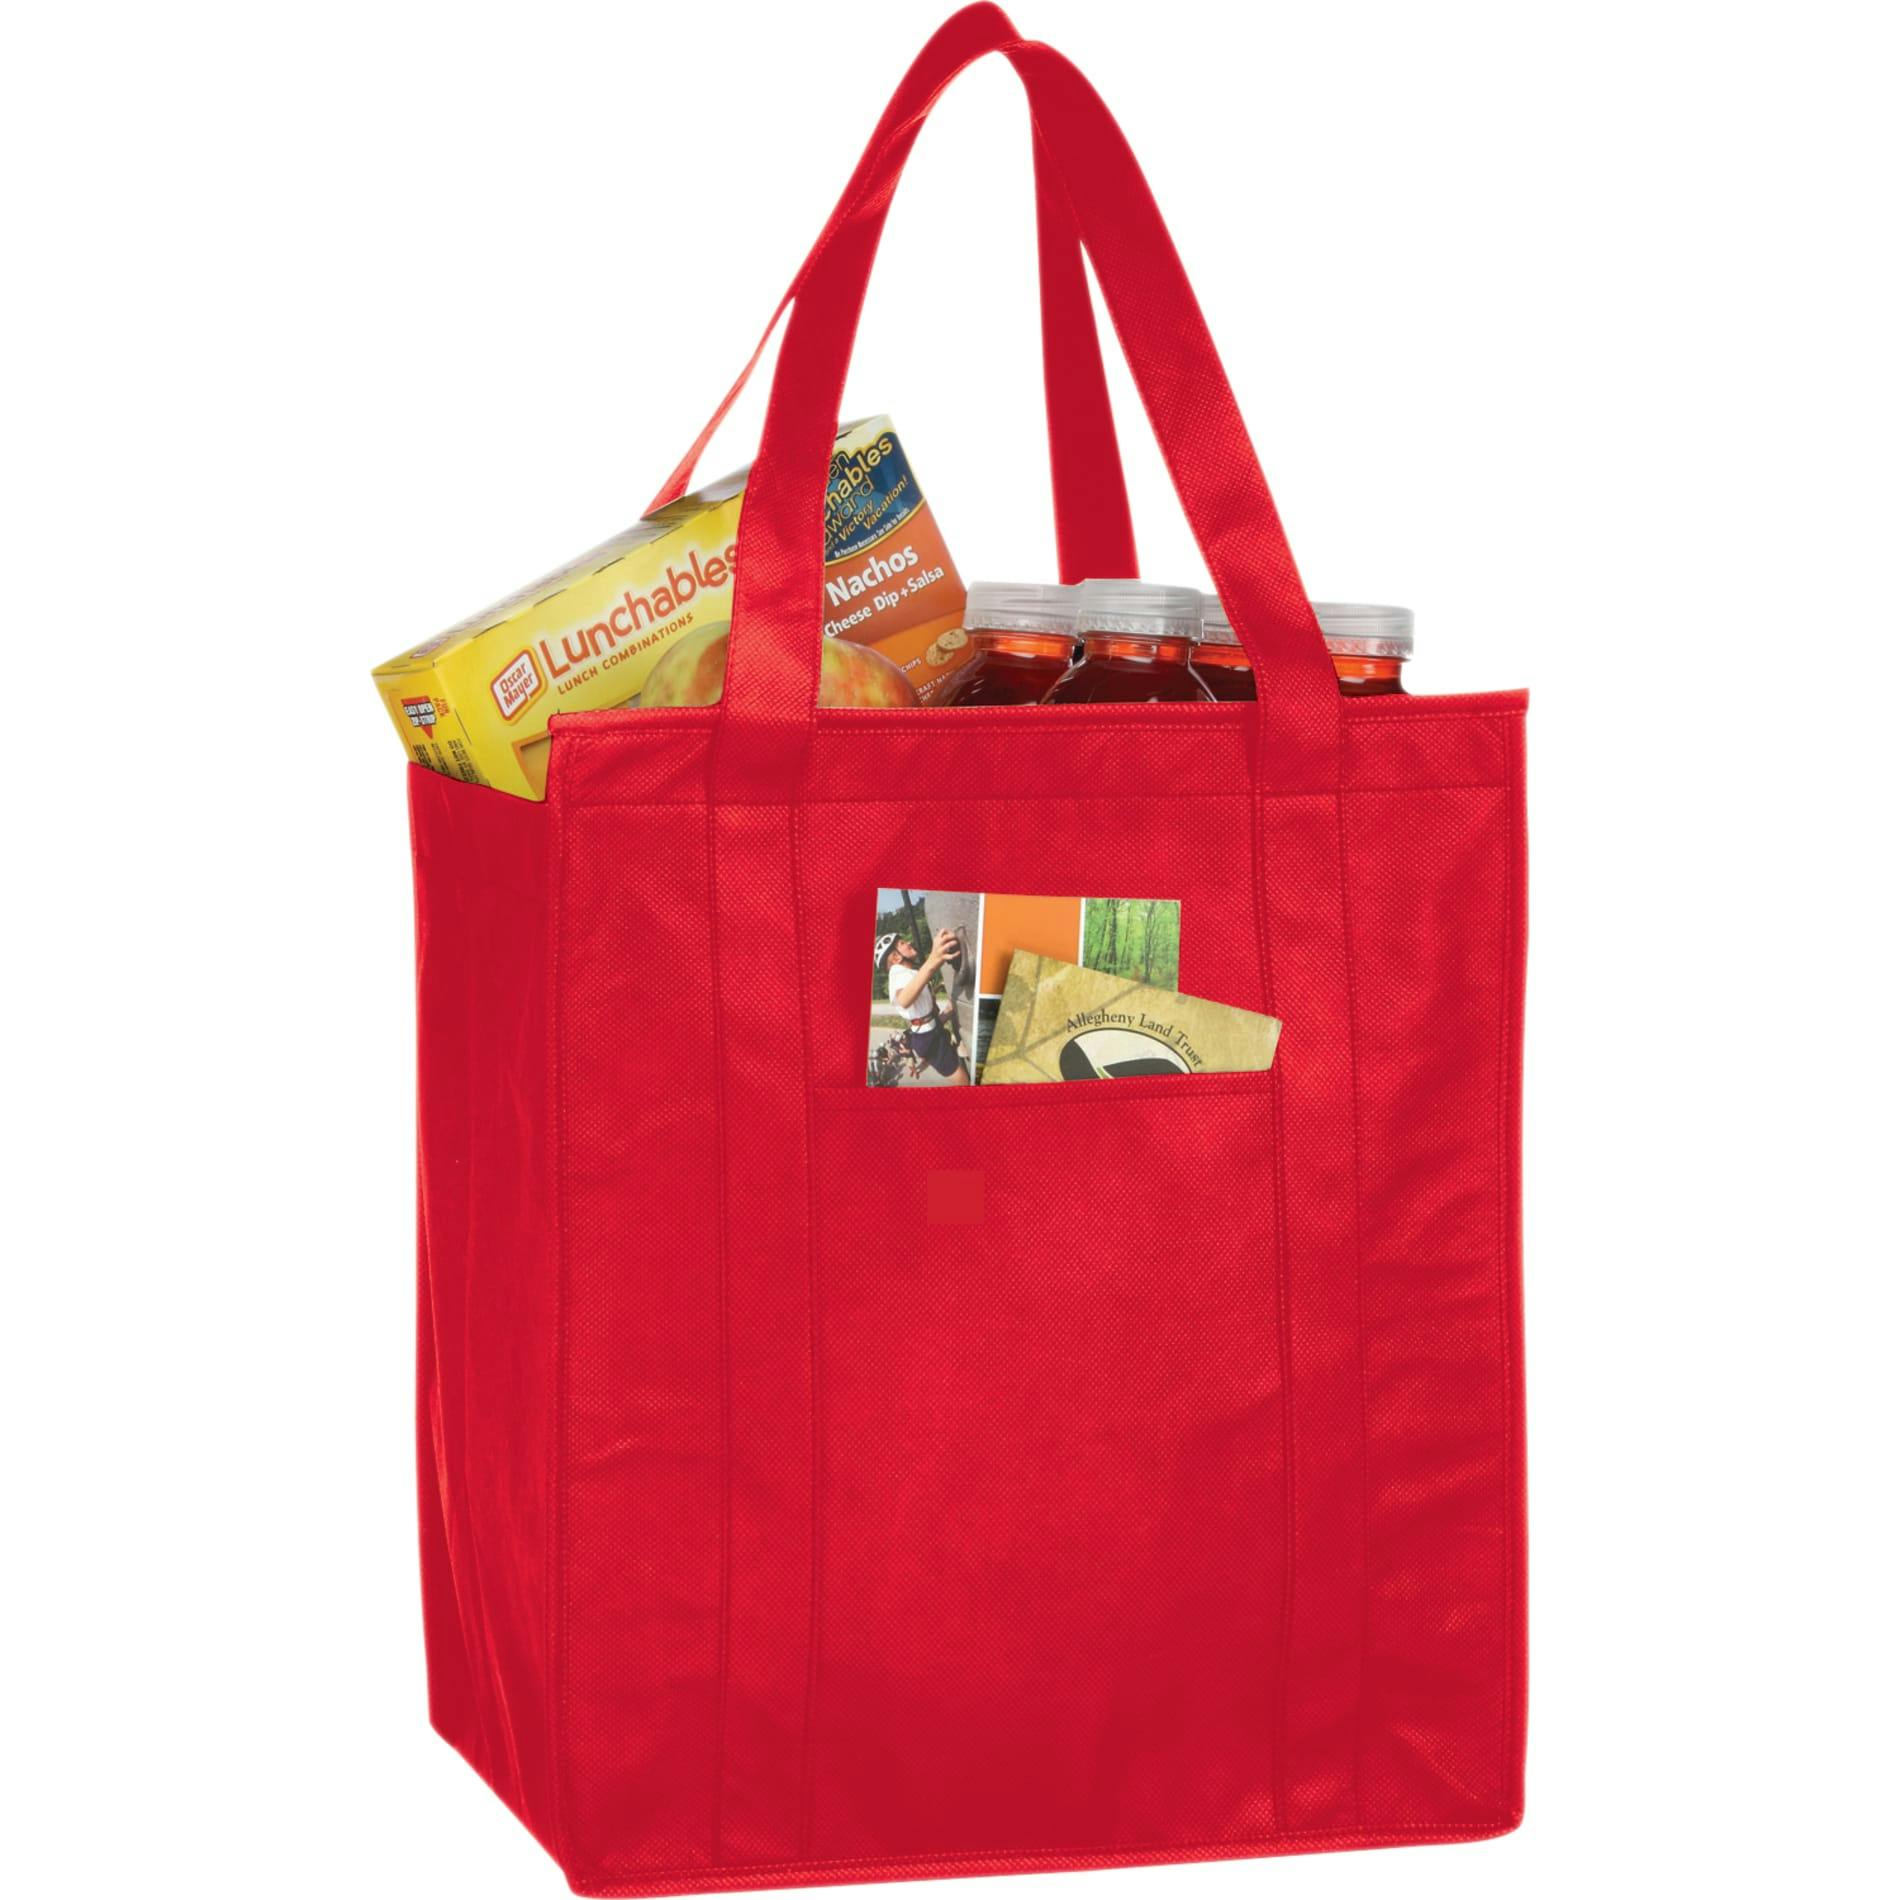 Hercules Insulated Grocery Tote - additional Image 3